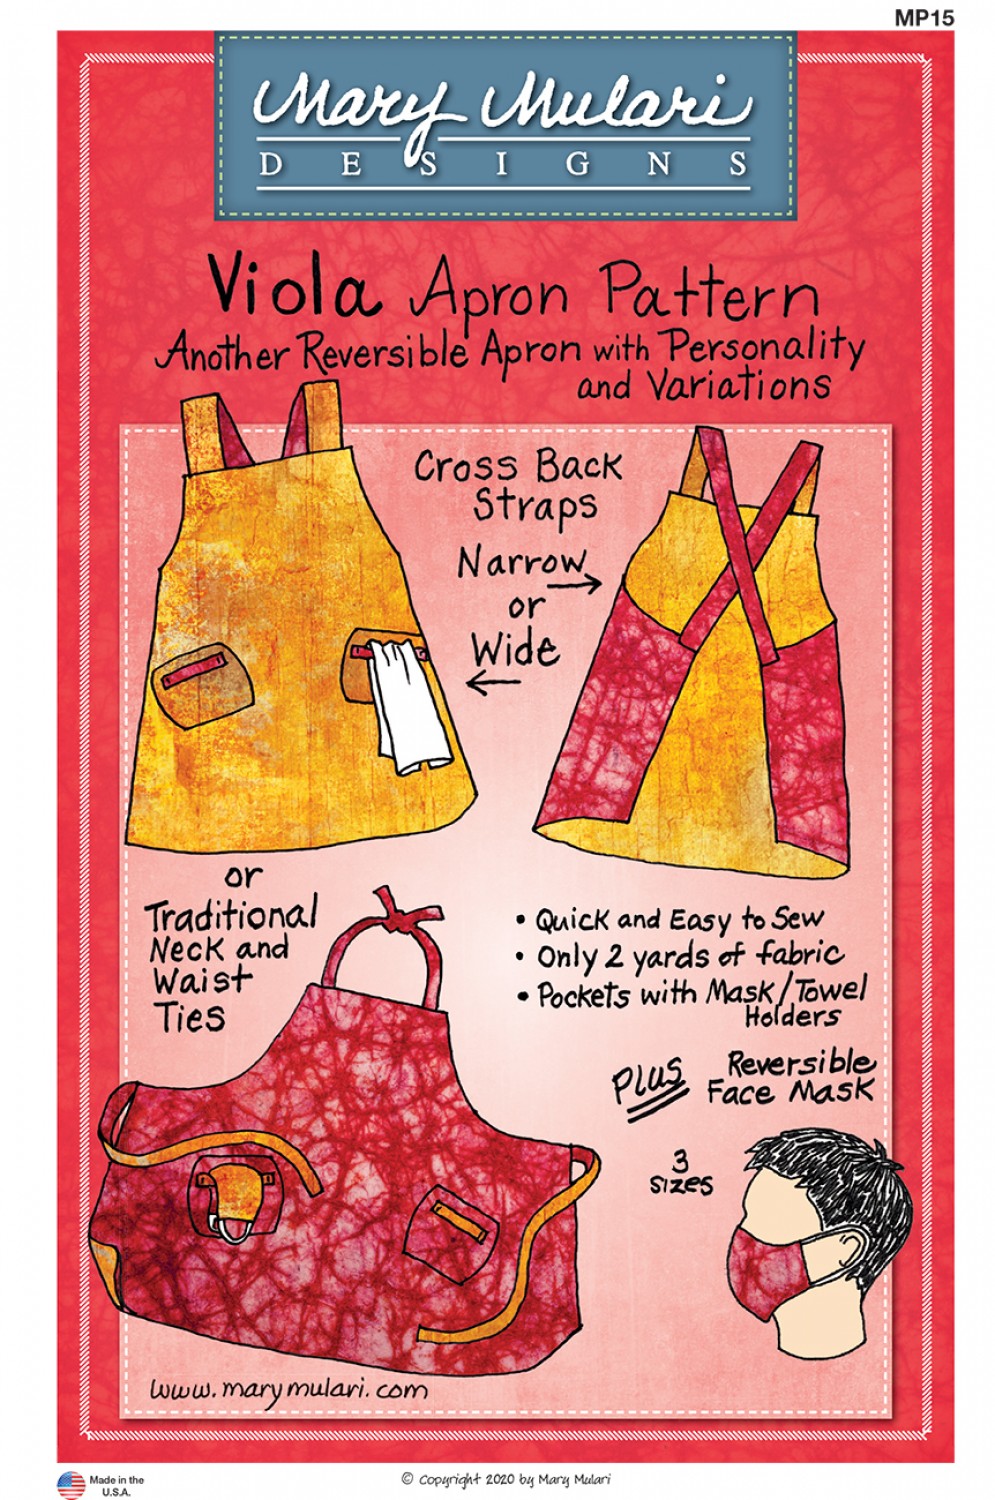 Viola Apron Sewing Pattern by Mary Mulari of Mary's Productions